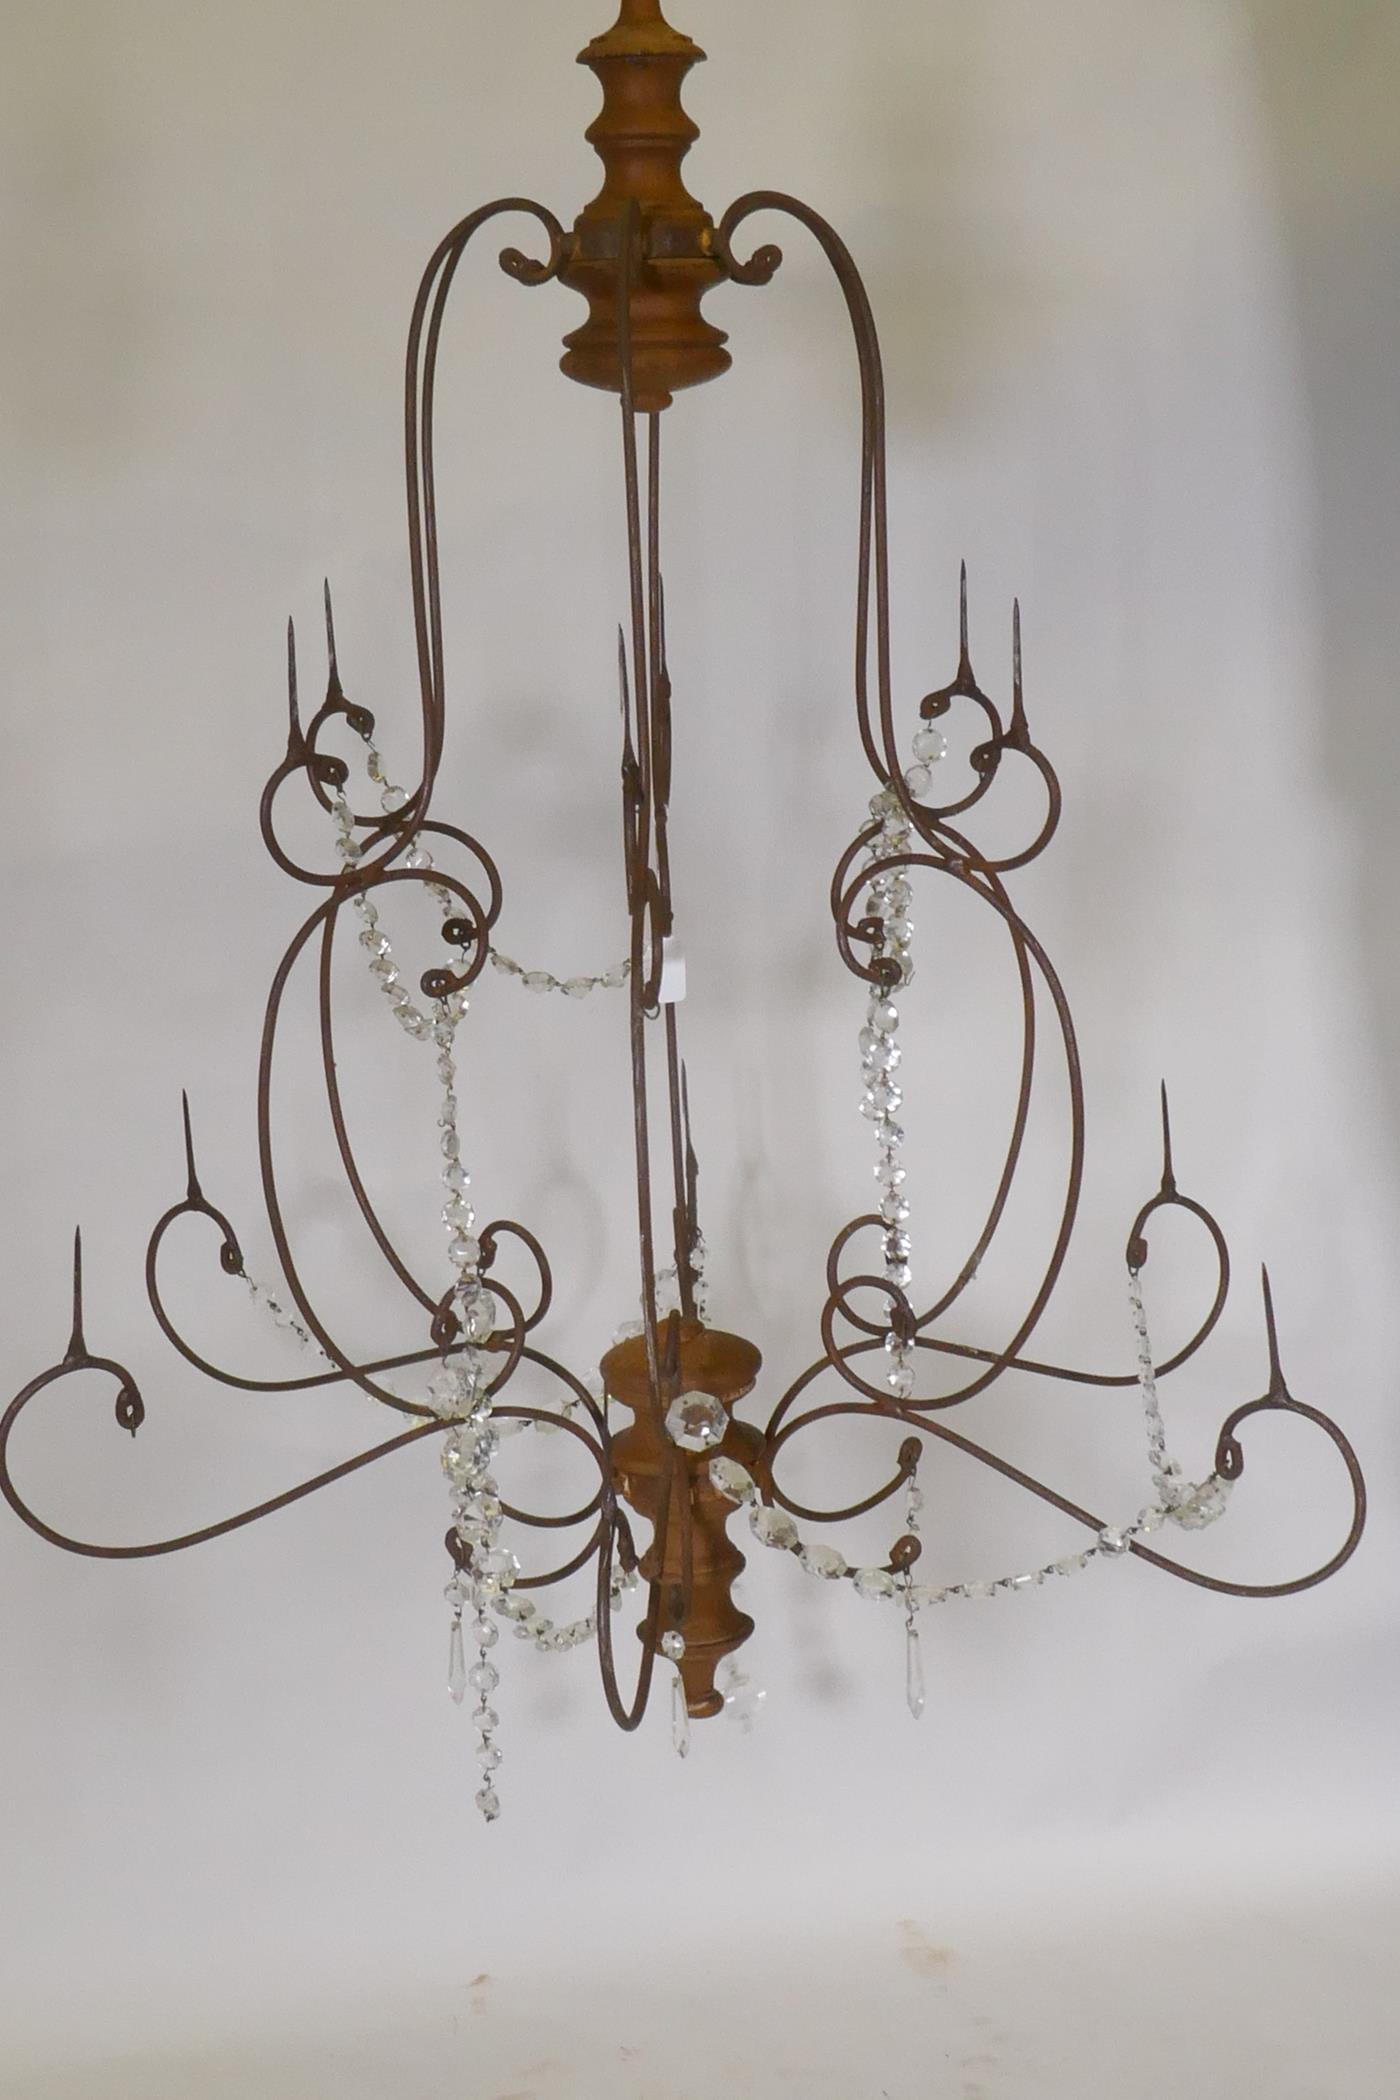 A wrought iron and pine six branch chandelier, with twelve candle prickets and glass lustre swags, - Image 2 of 2